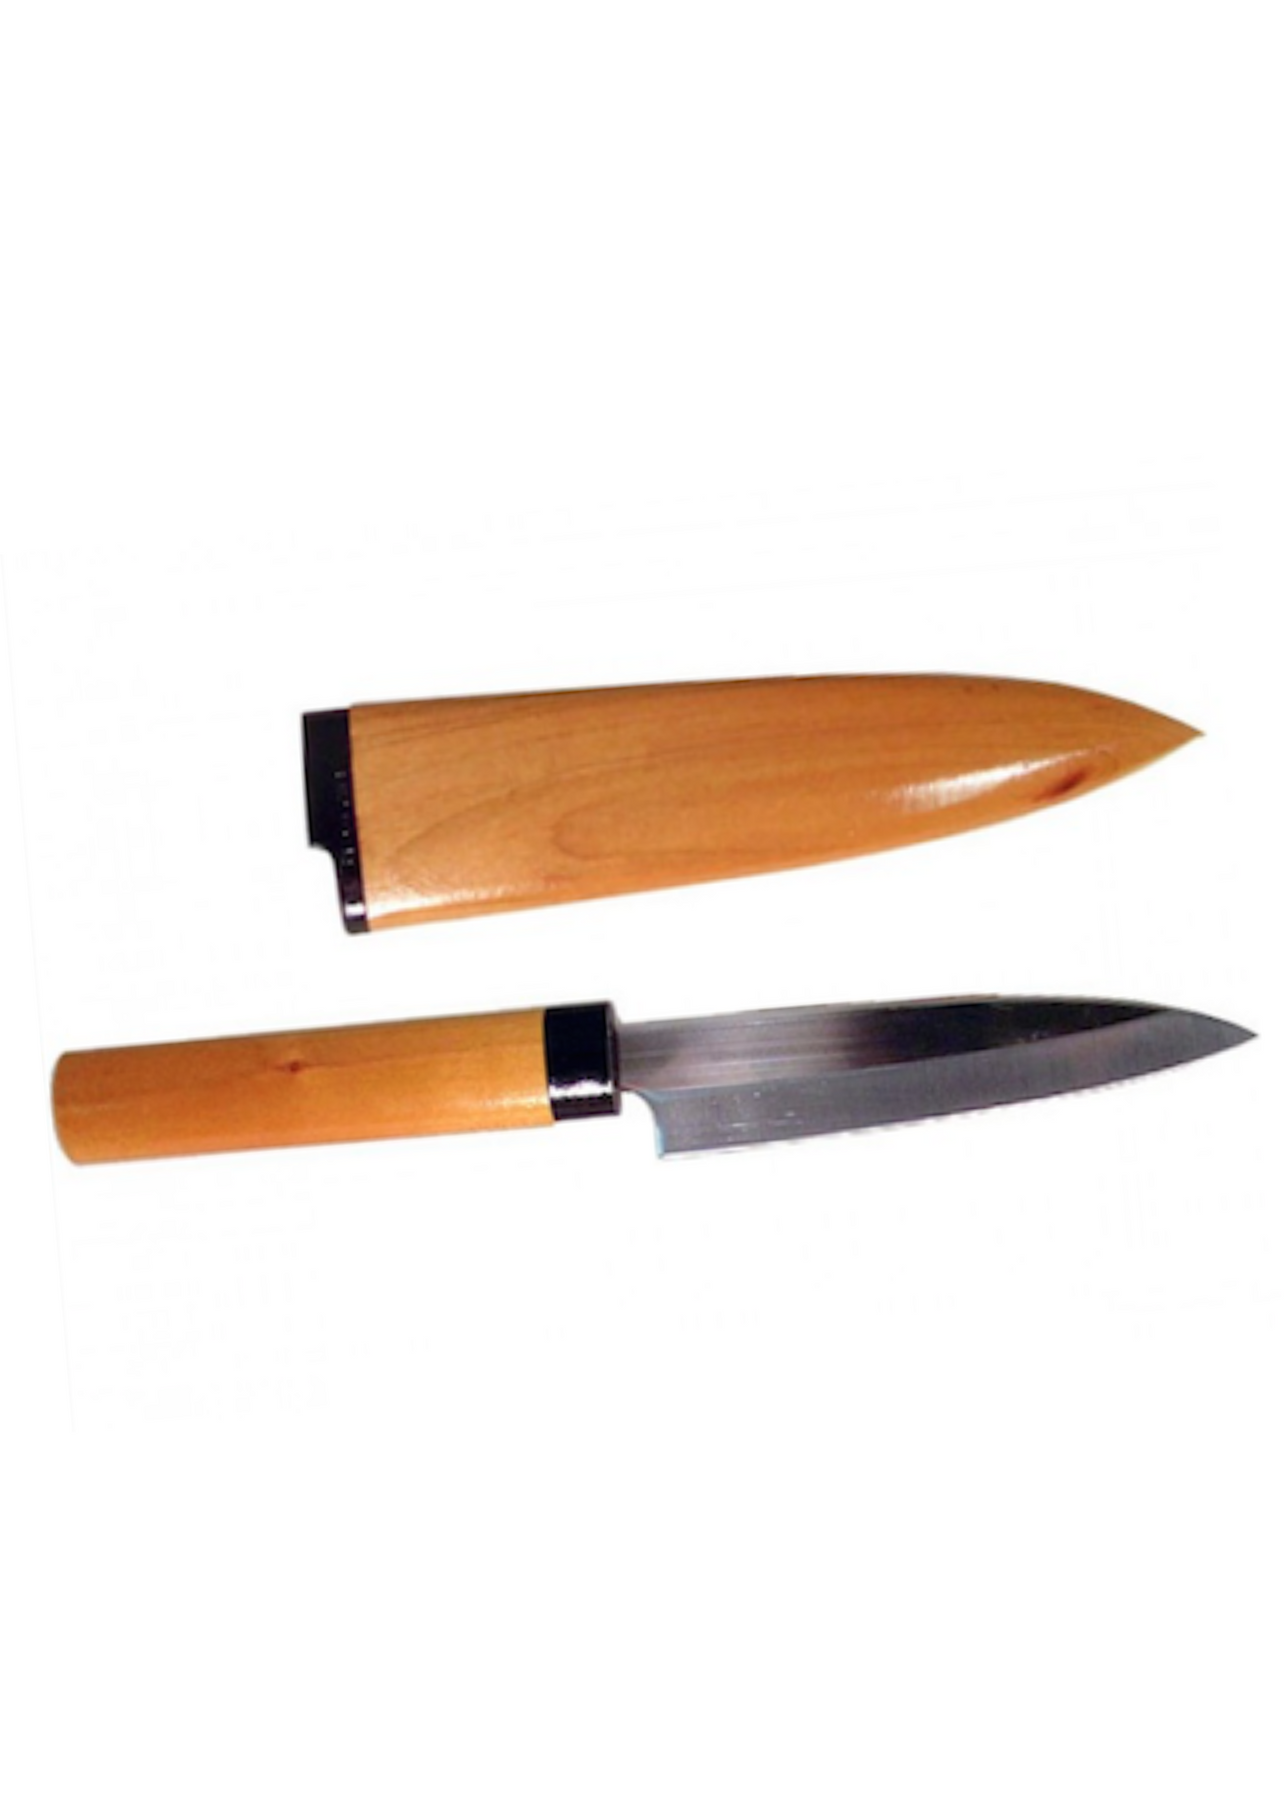 https://sowexotic.com/cdn/shop/products/Sow_Exotic_Garden_Tools_Suncraft_Fruit_Pairing_Knife_1800x1800.png?v=1602553417